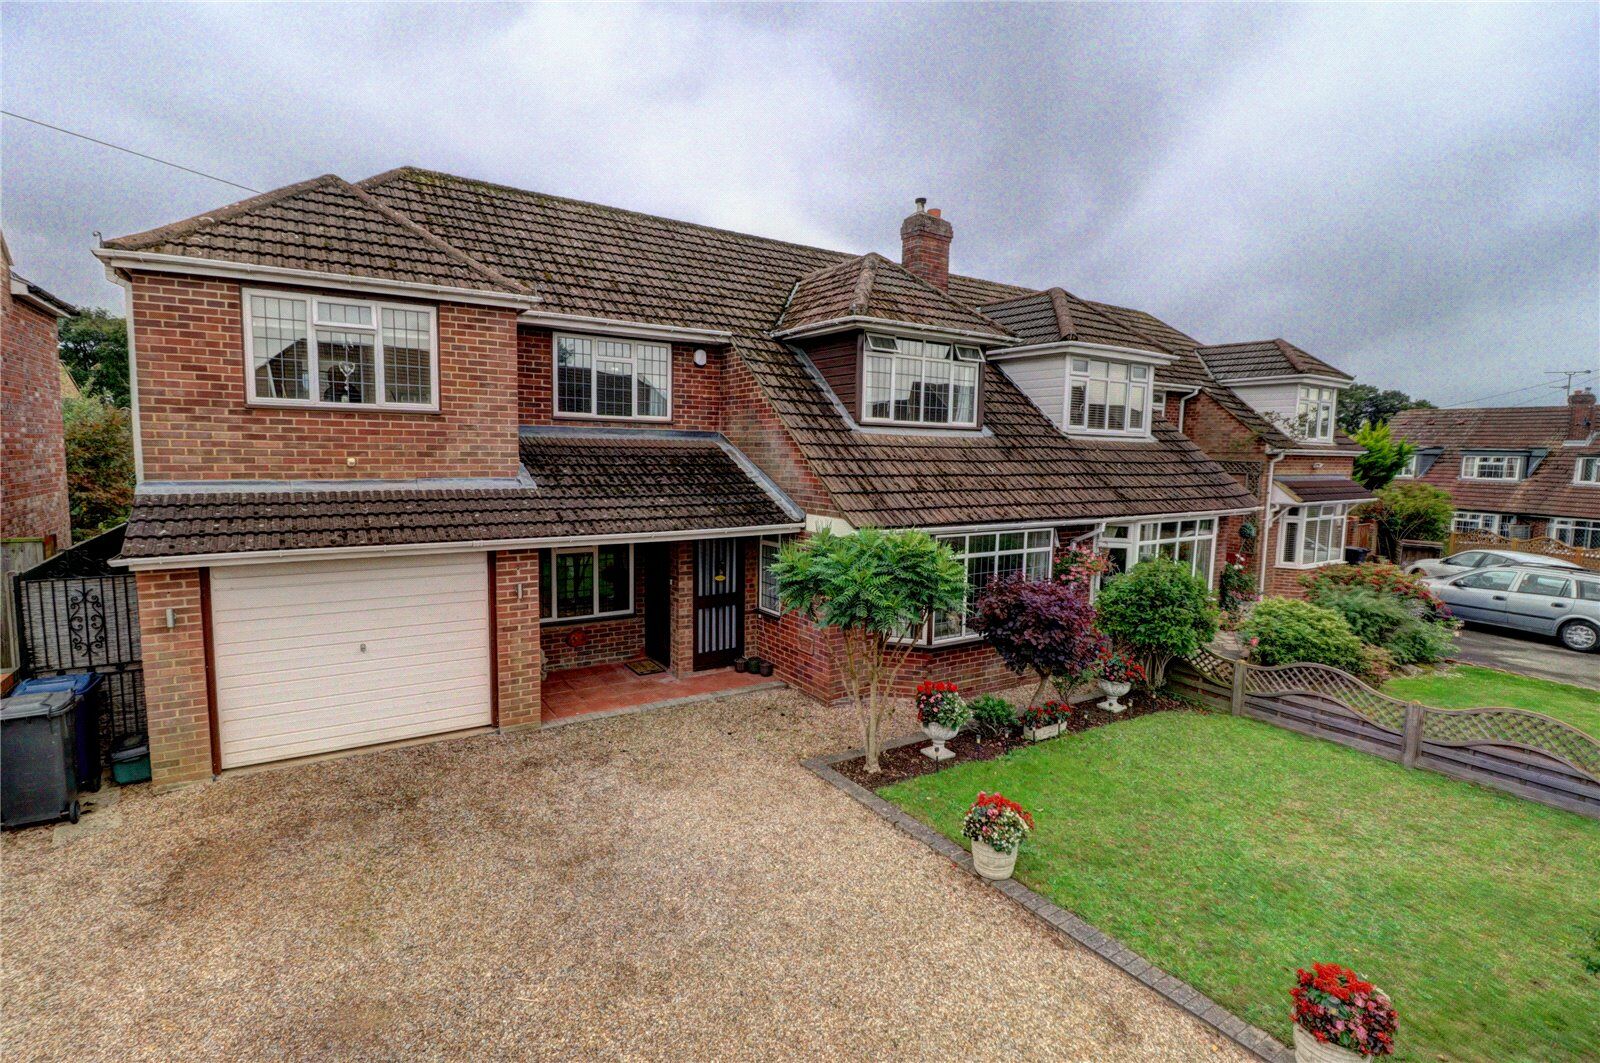 4 bedroom semi detached house for sale Green Crescent, Flackwell Heath, HP10, main image